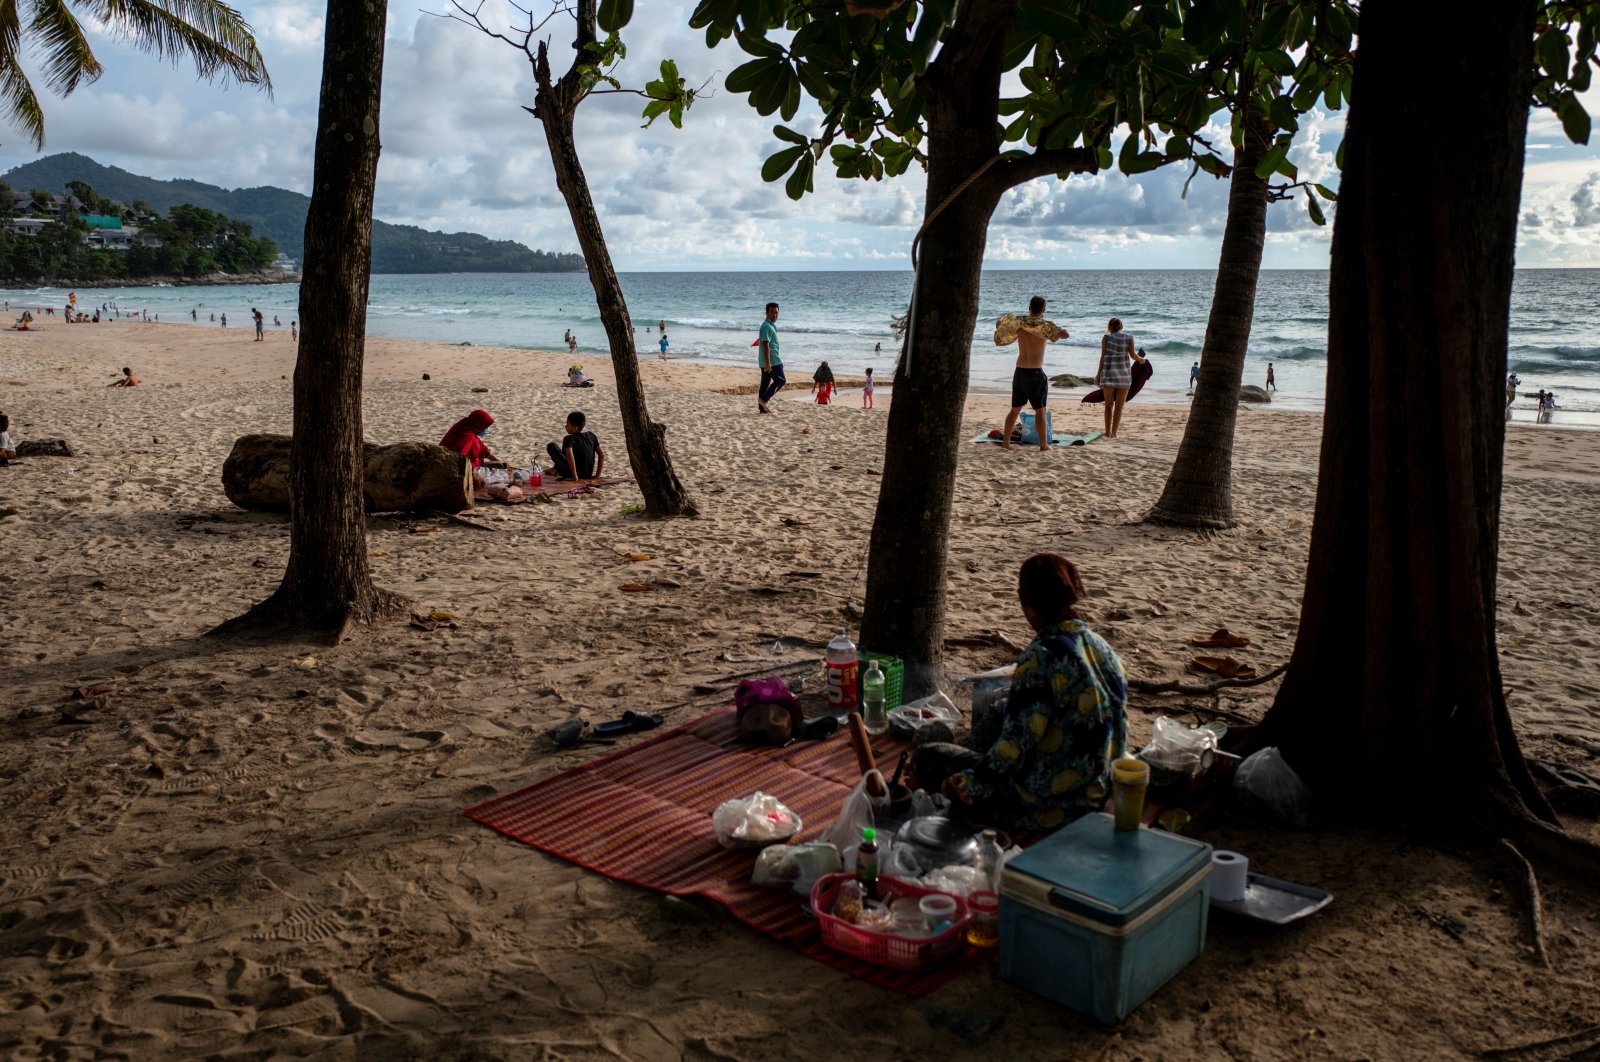 People enjoy the beach as Phuket opens for foreigners, who are fully vaccinated against the coronavirus, to visit the resort island without quarantine, in Phuket, Thailand, Sept. 19, 2021. (Reuters Photo)